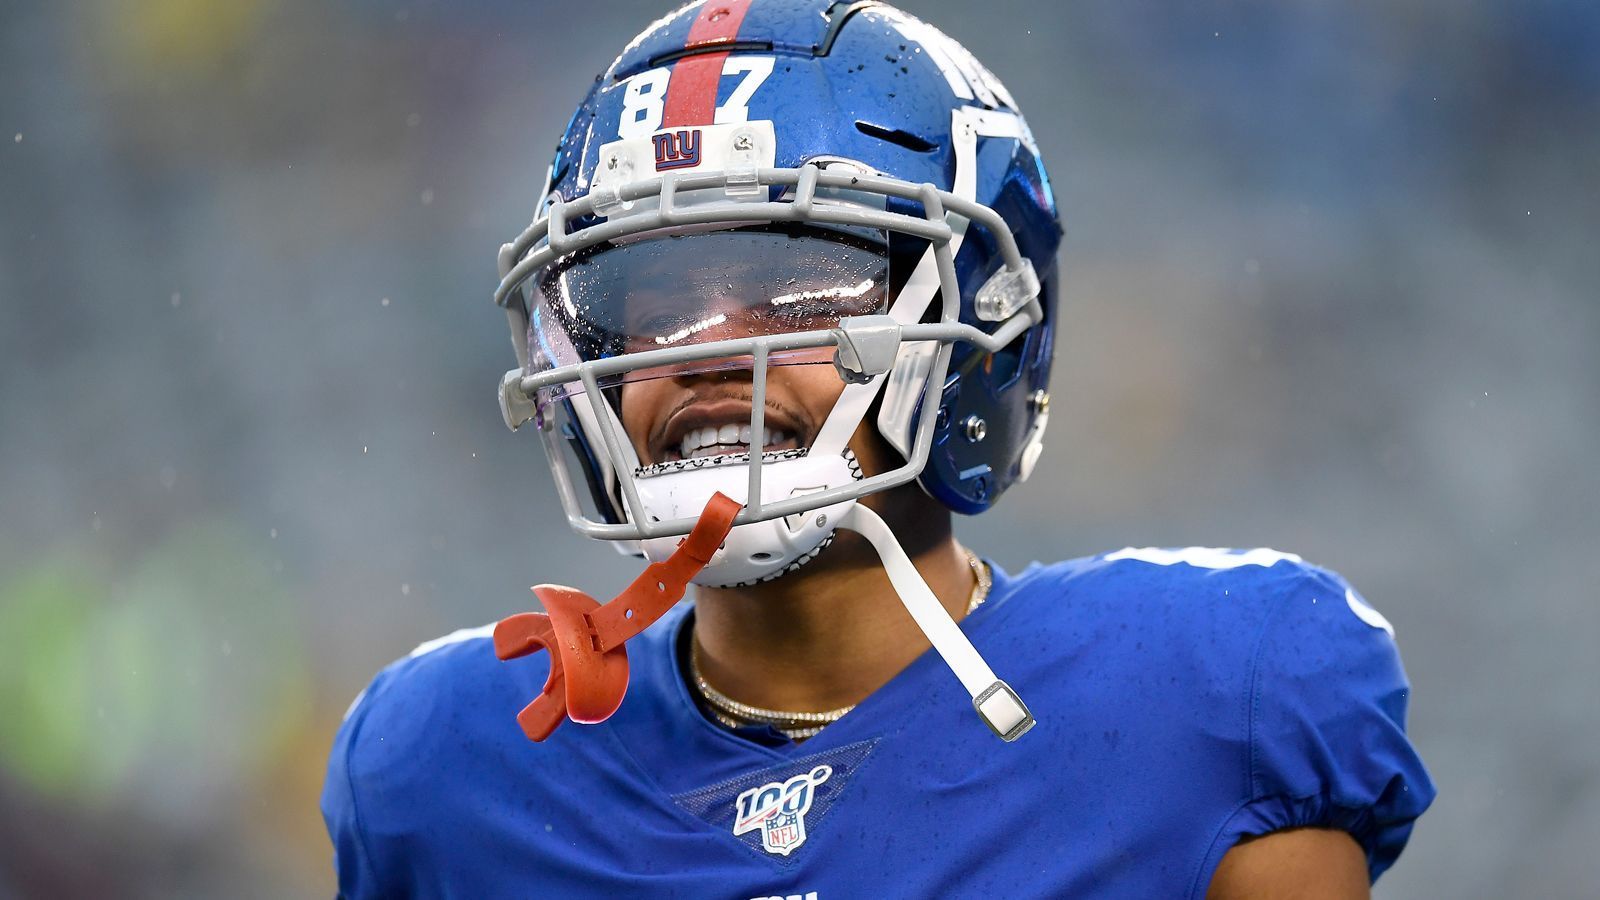 
                <strong>New York Giants: Sterling Shepard</strong><br>
                Position: Wide ReceiverIm Team seit: 5 Saisons
              